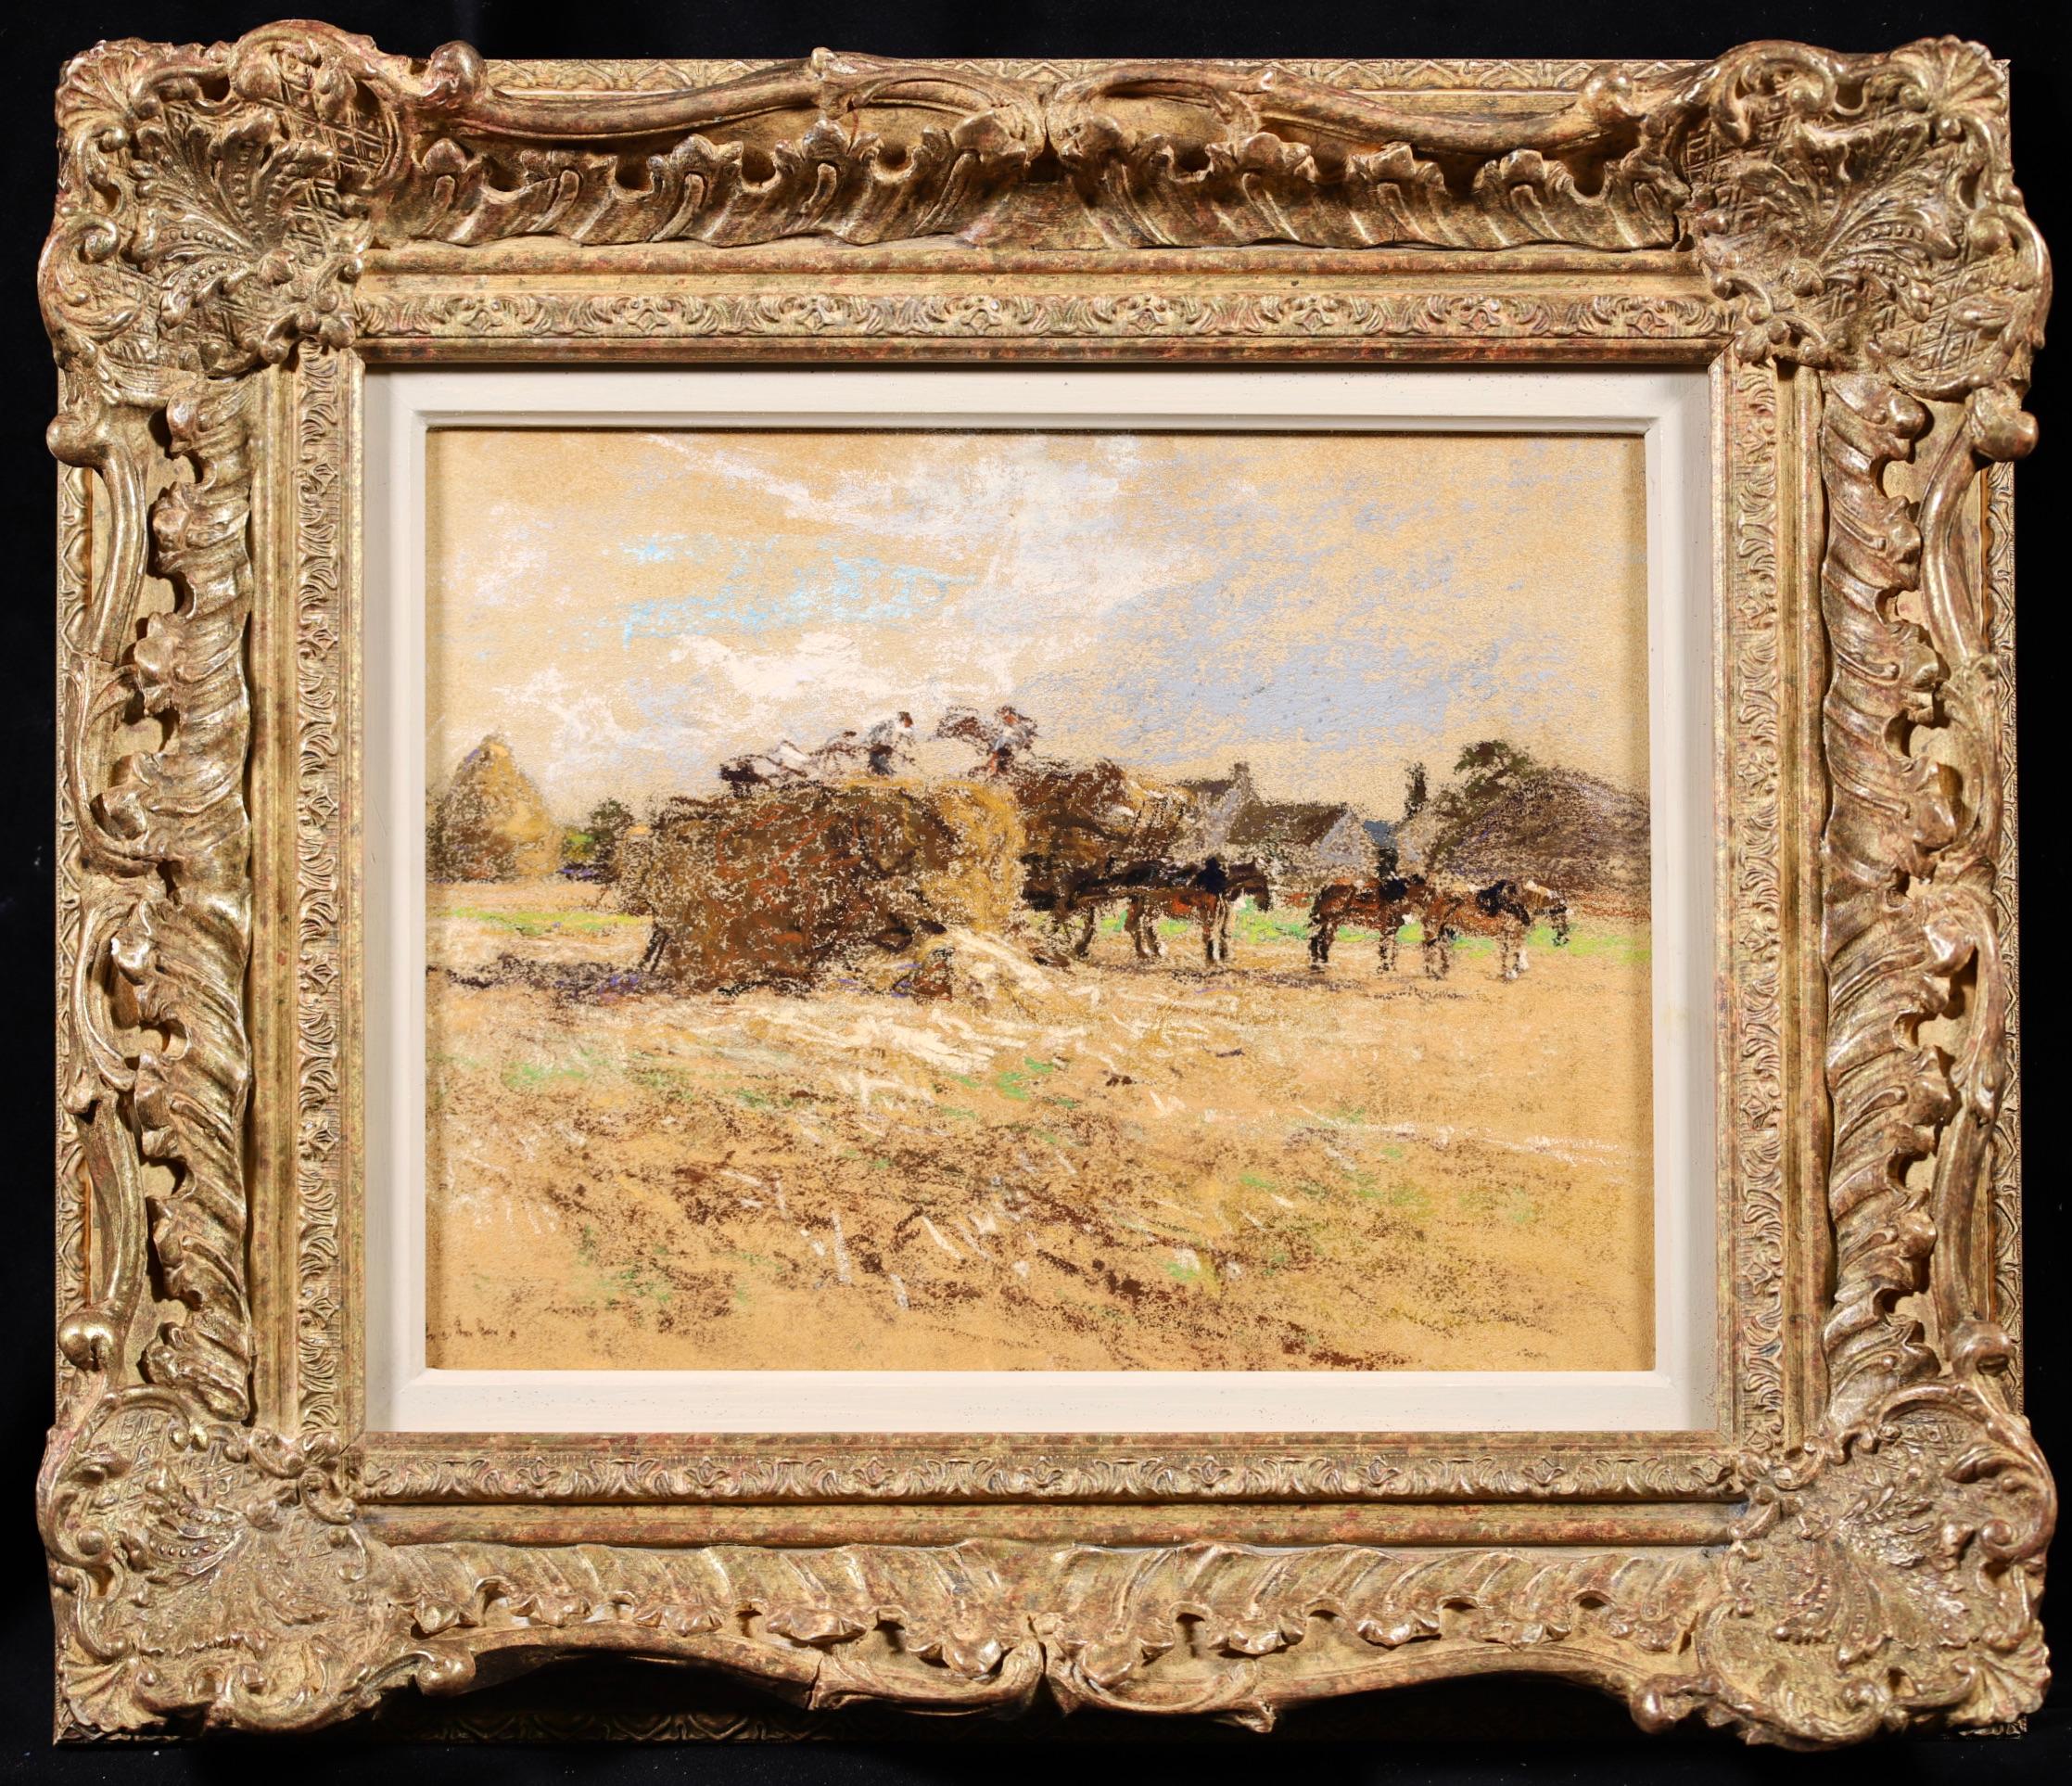 Haymaking - Messy, Seine-et-Marne - Figures & Horses in Landscape by Lhermitte